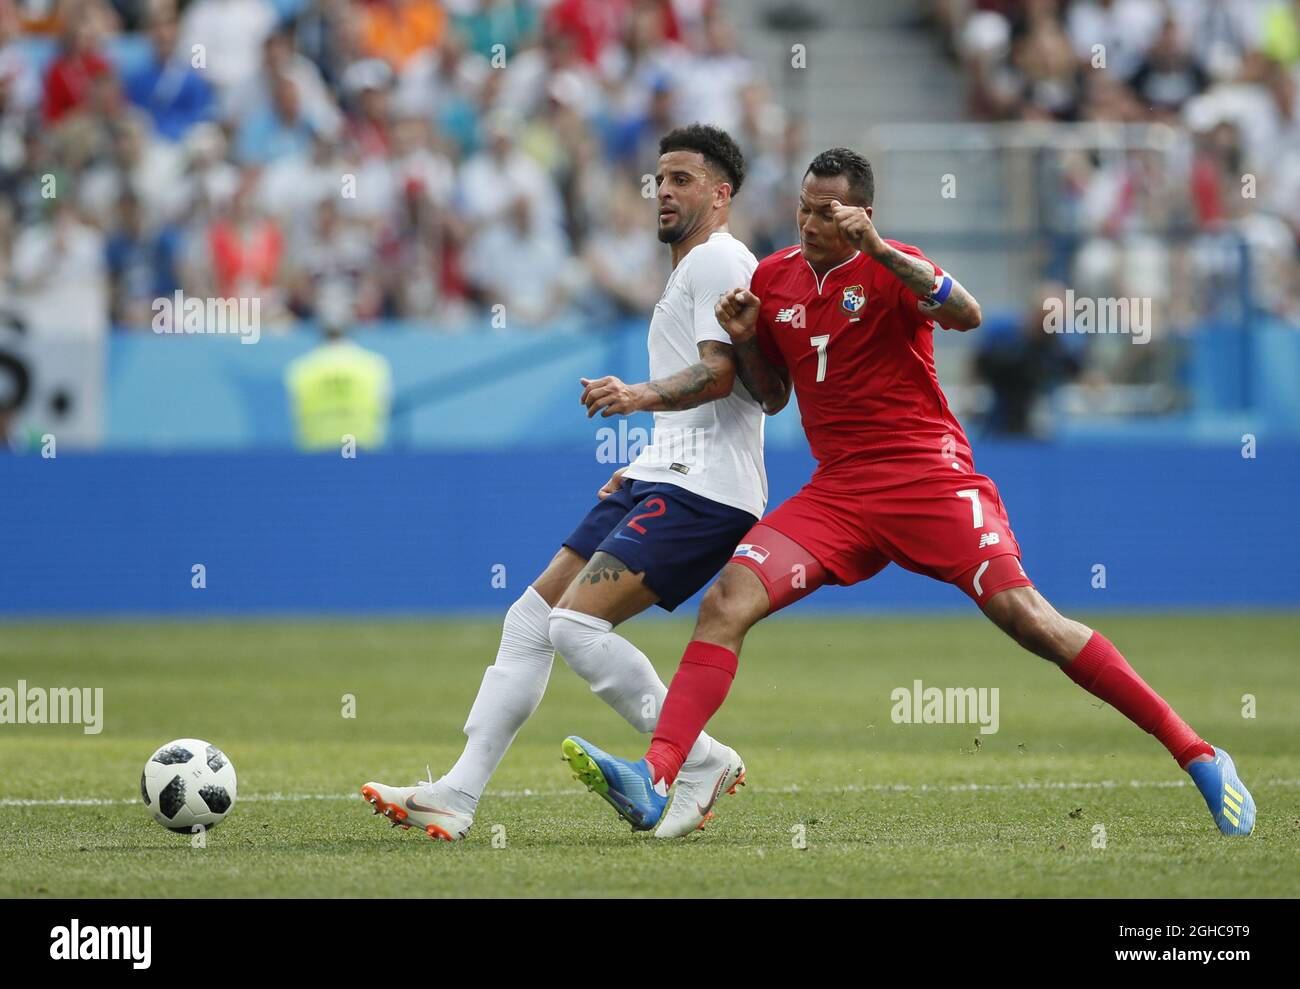 Kyle Walker of England tackled by Blas Perez of Panama during the FIFA World Cup 2018 Group G match at the Nizhny Novgorod Stadium, Nizhny Novgorod. Picture date 24th June 2018. Picture credit should read: David Klein/Sportimage via PA Images Stock Photo